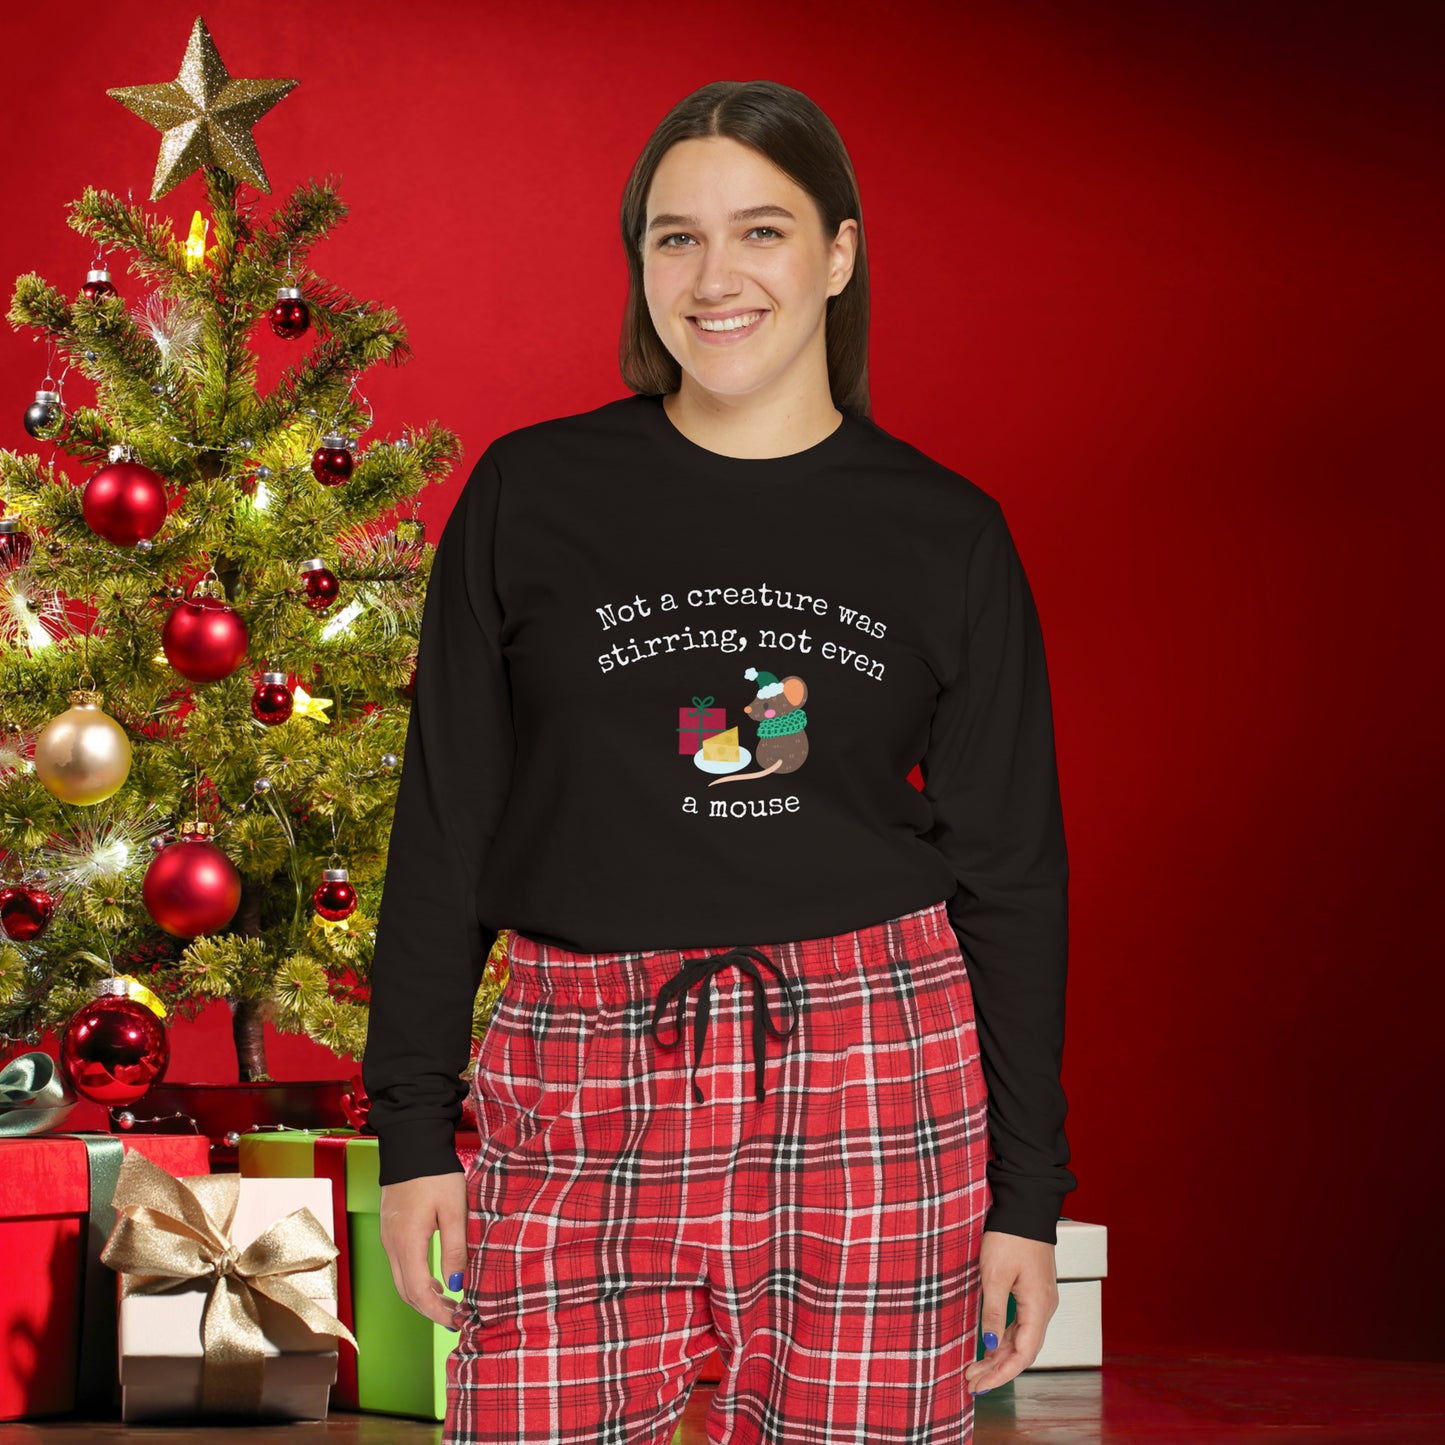 Women's Long Sleeve Pajama Set, Family Christmas Pajamas, Flannel Pants, "Not a creature was stirring, not even a mouse"